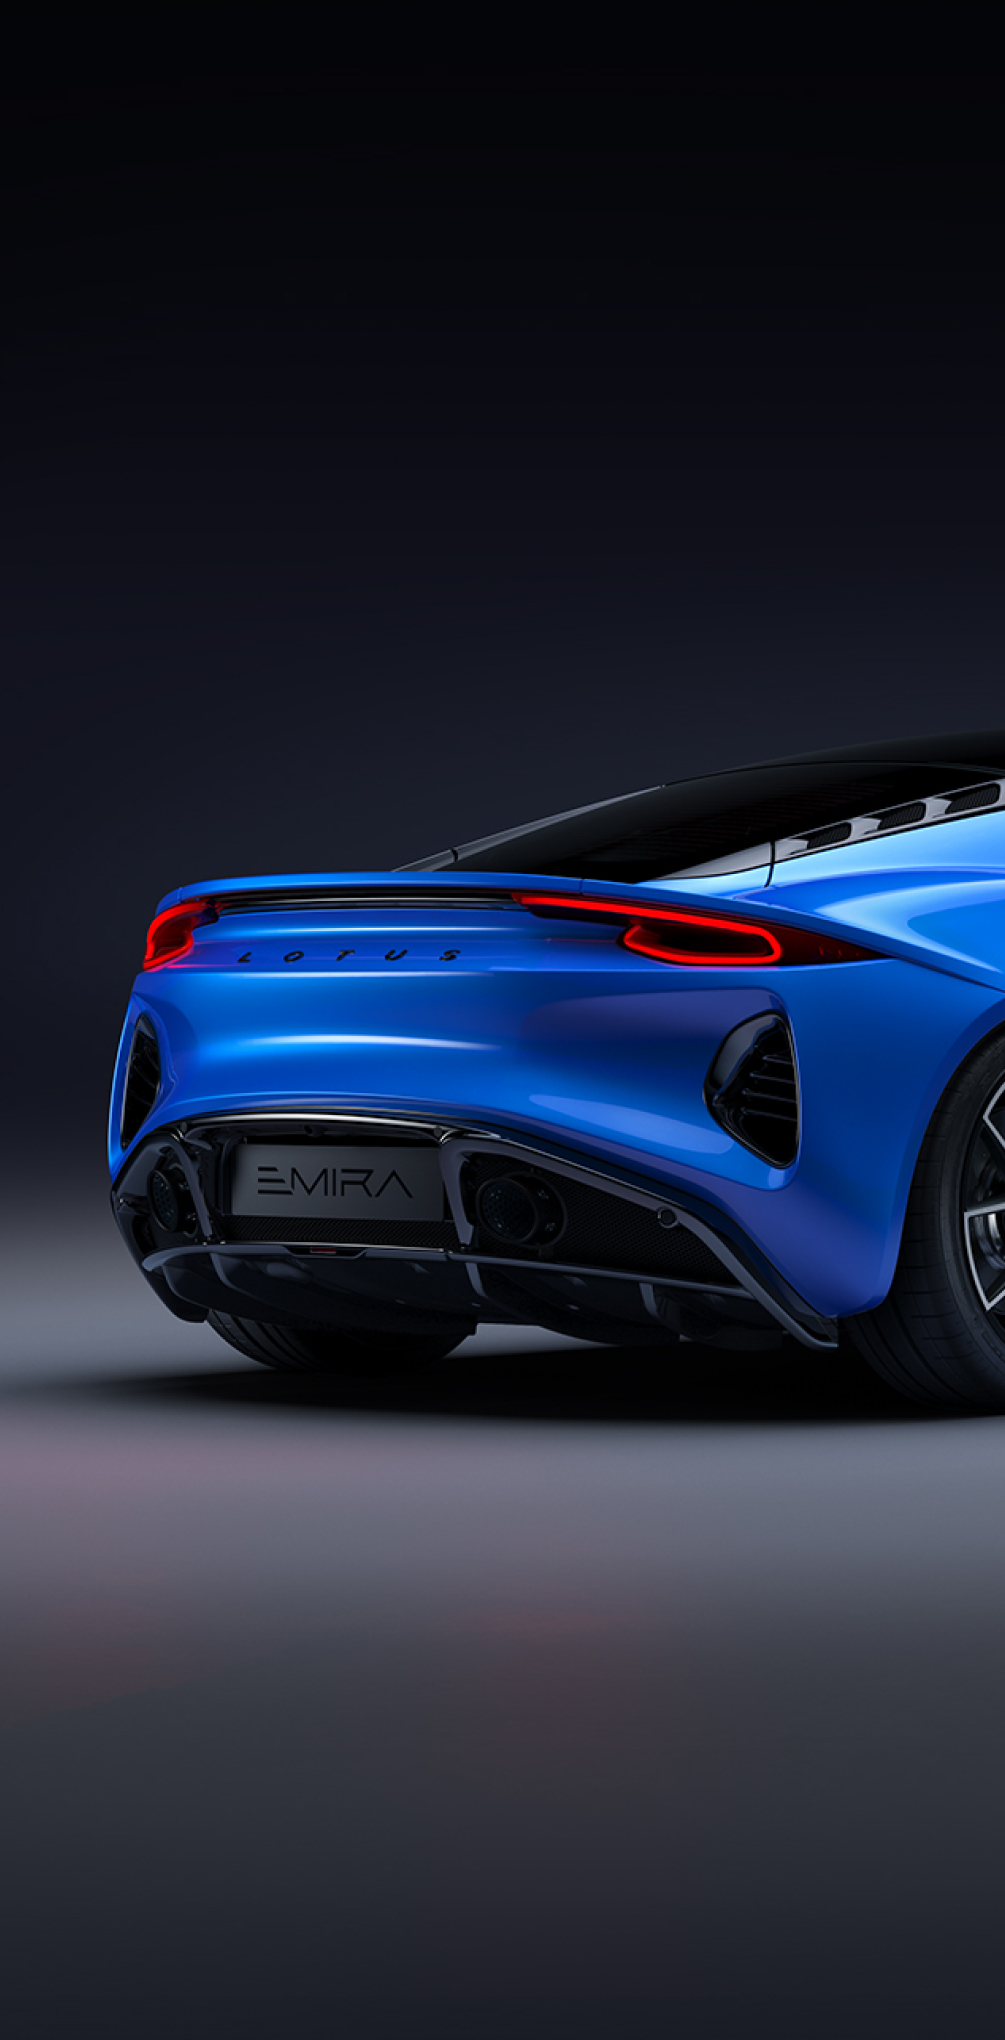 Rear angled shot of a blue Lotus Emira in an abstract grey environment. The rear running lights are glowing red. | 0702M-图集4.jpg